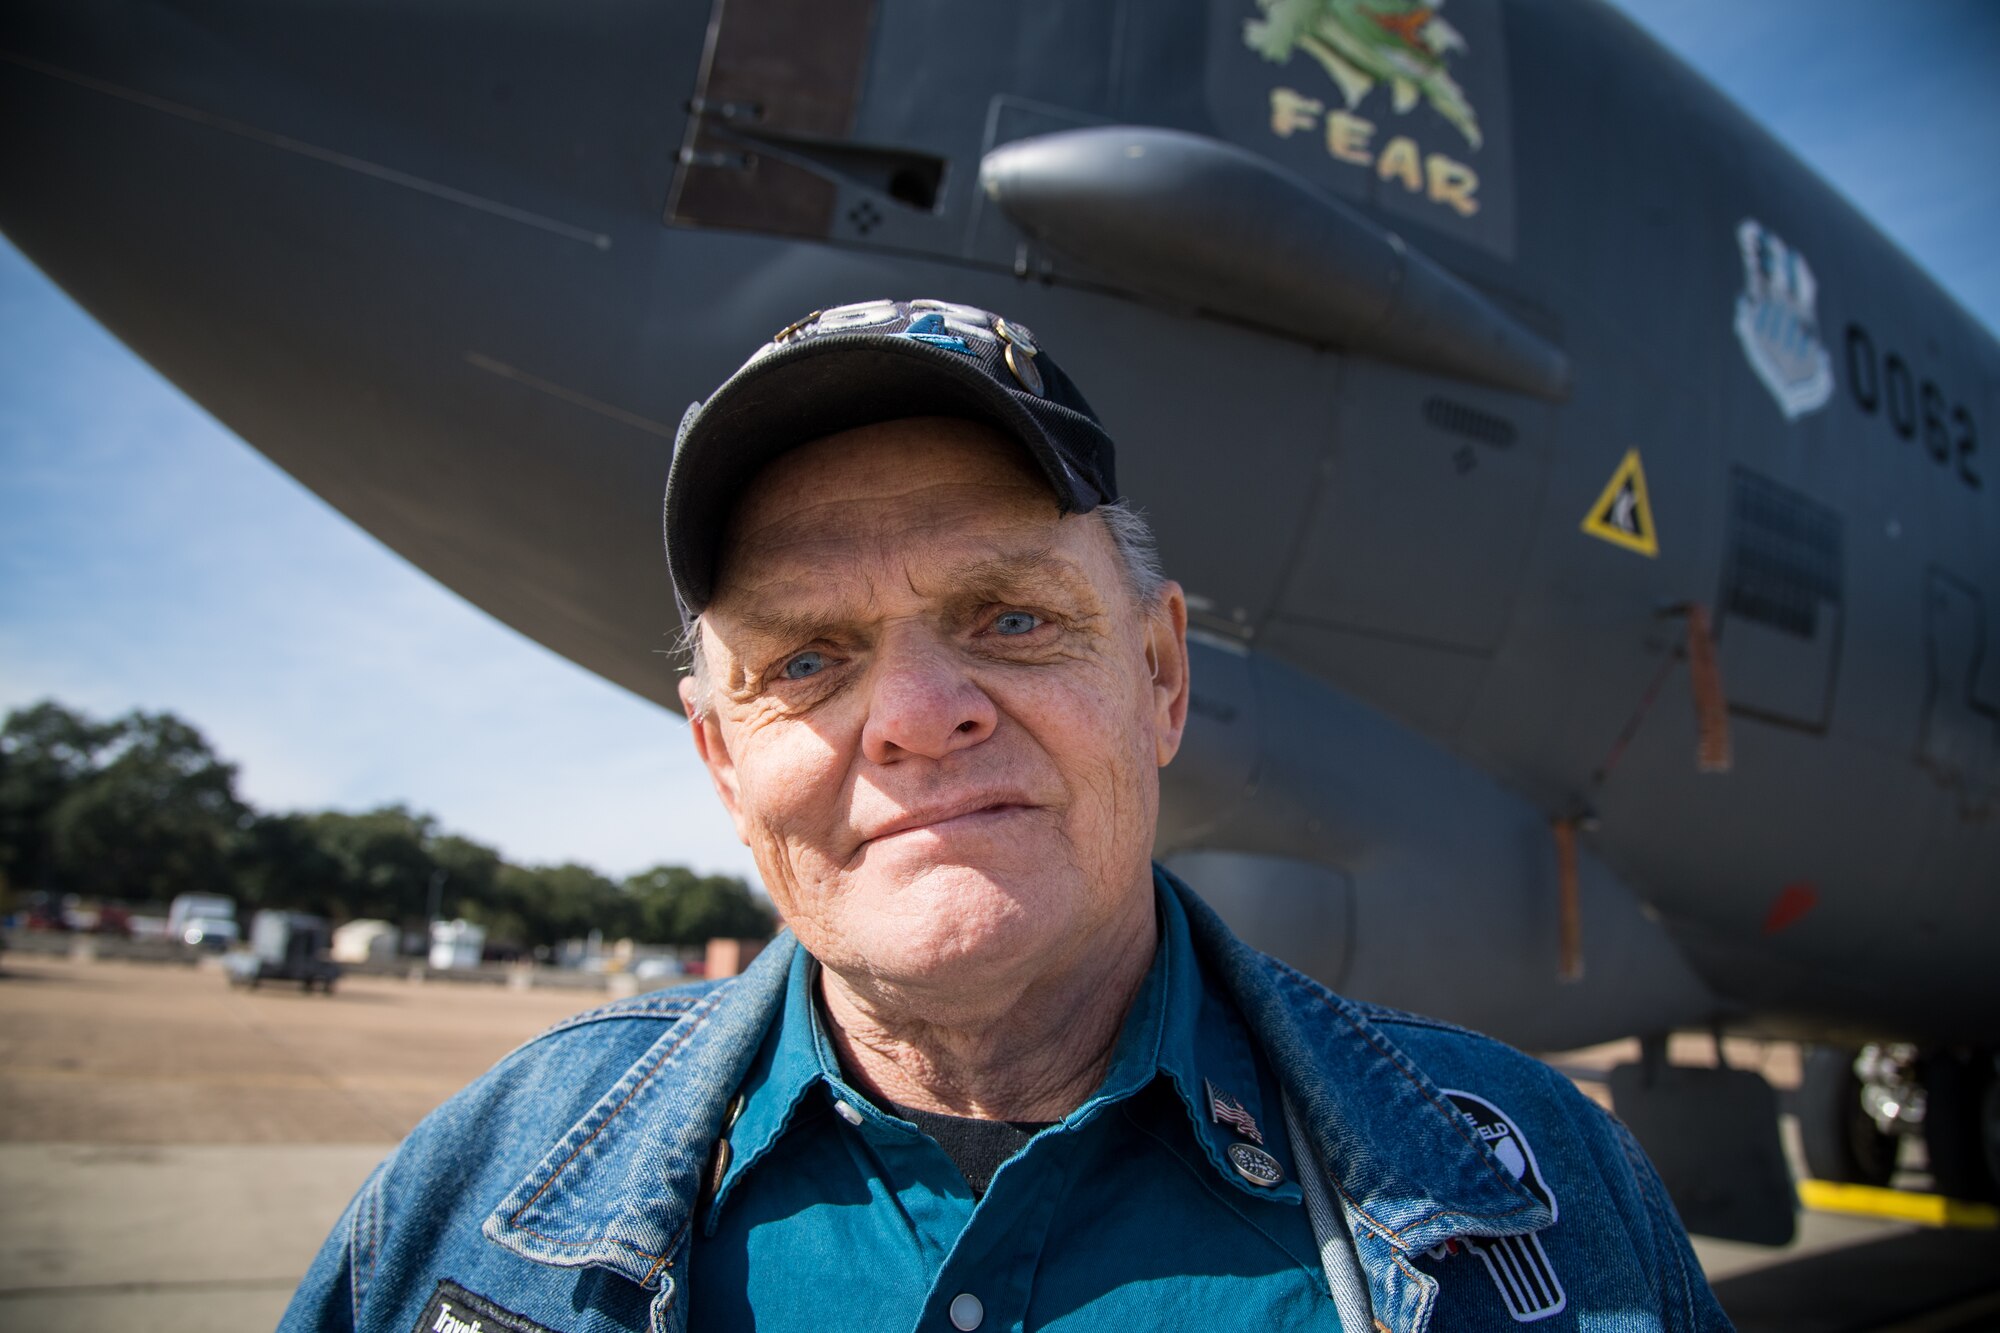 Retired Staff Sgt. Mark James, former B-52H Stratofortress crew chief, reunites with his former aircraft at Barksdale Air Force Base, La., Nov 13, 2019. James was the dedicated crew chief on aircraft 0062, which is now assigned to the 2nd Aircraft Maintenance Squadron at Barksdale. (U.S. Air Force photo by Airman 1st Class Jacob B. Wrightsman)